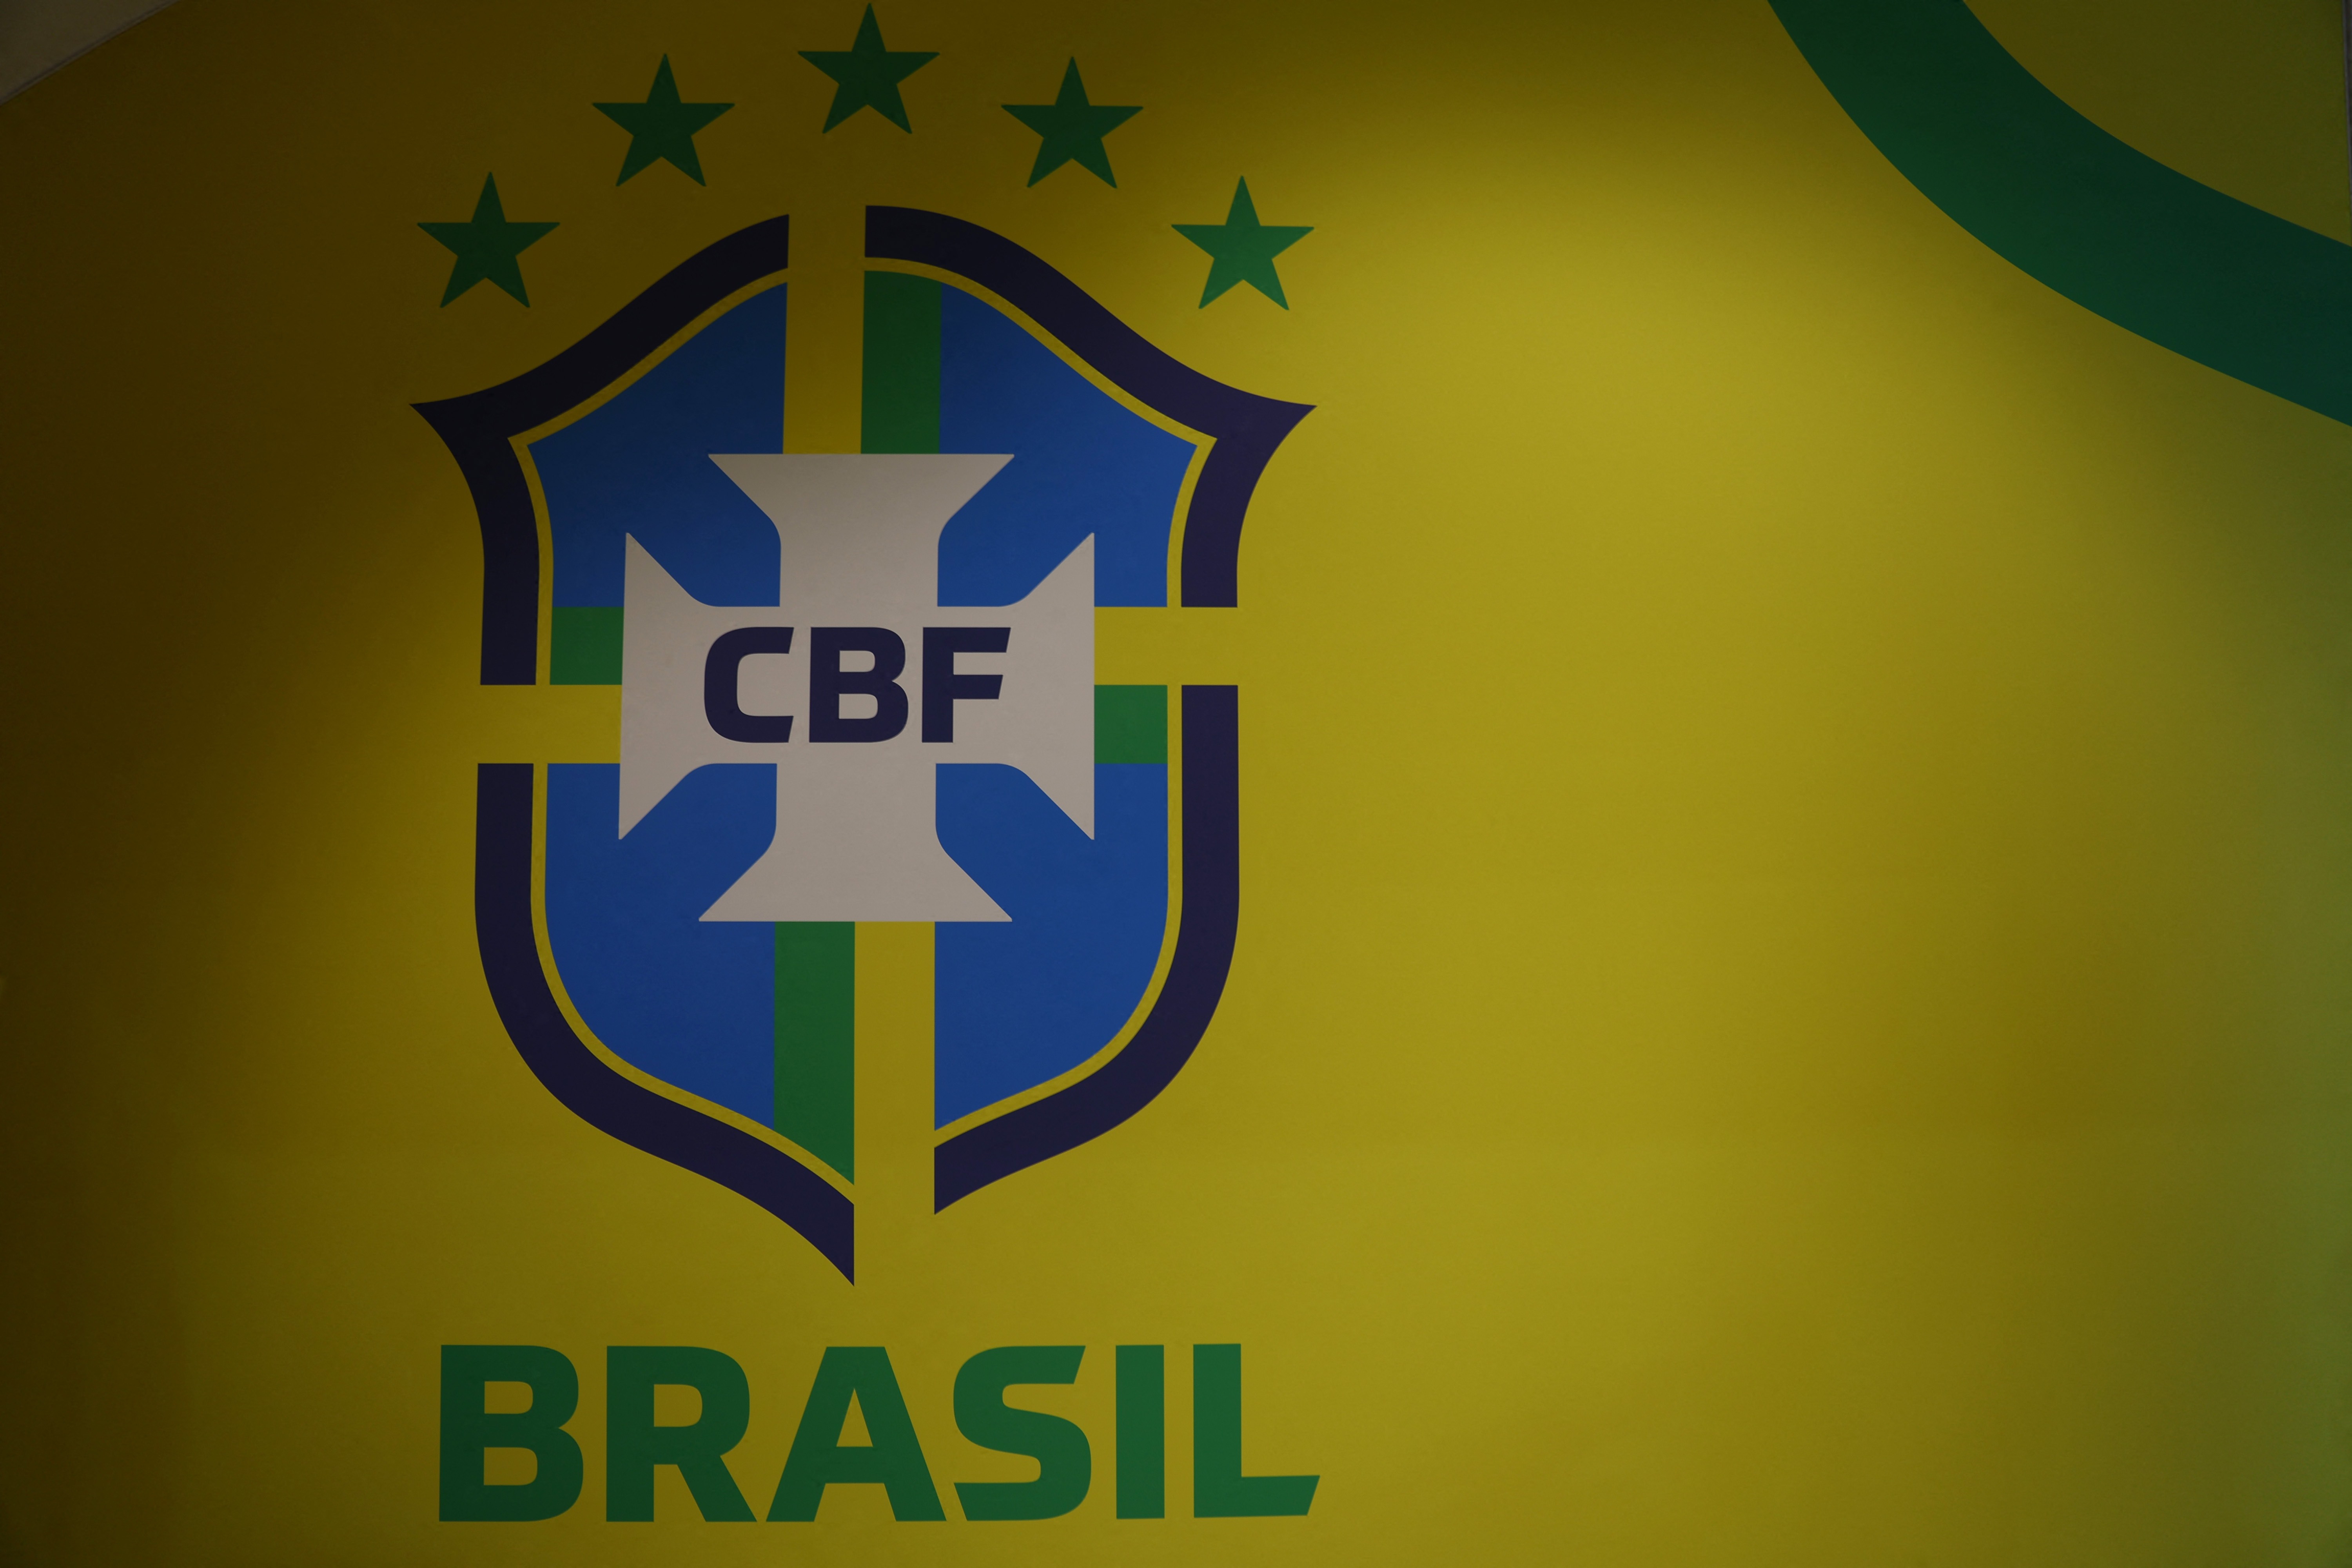 Brazil at the 2022 World Cup: who is in Tite's 26-man squad?